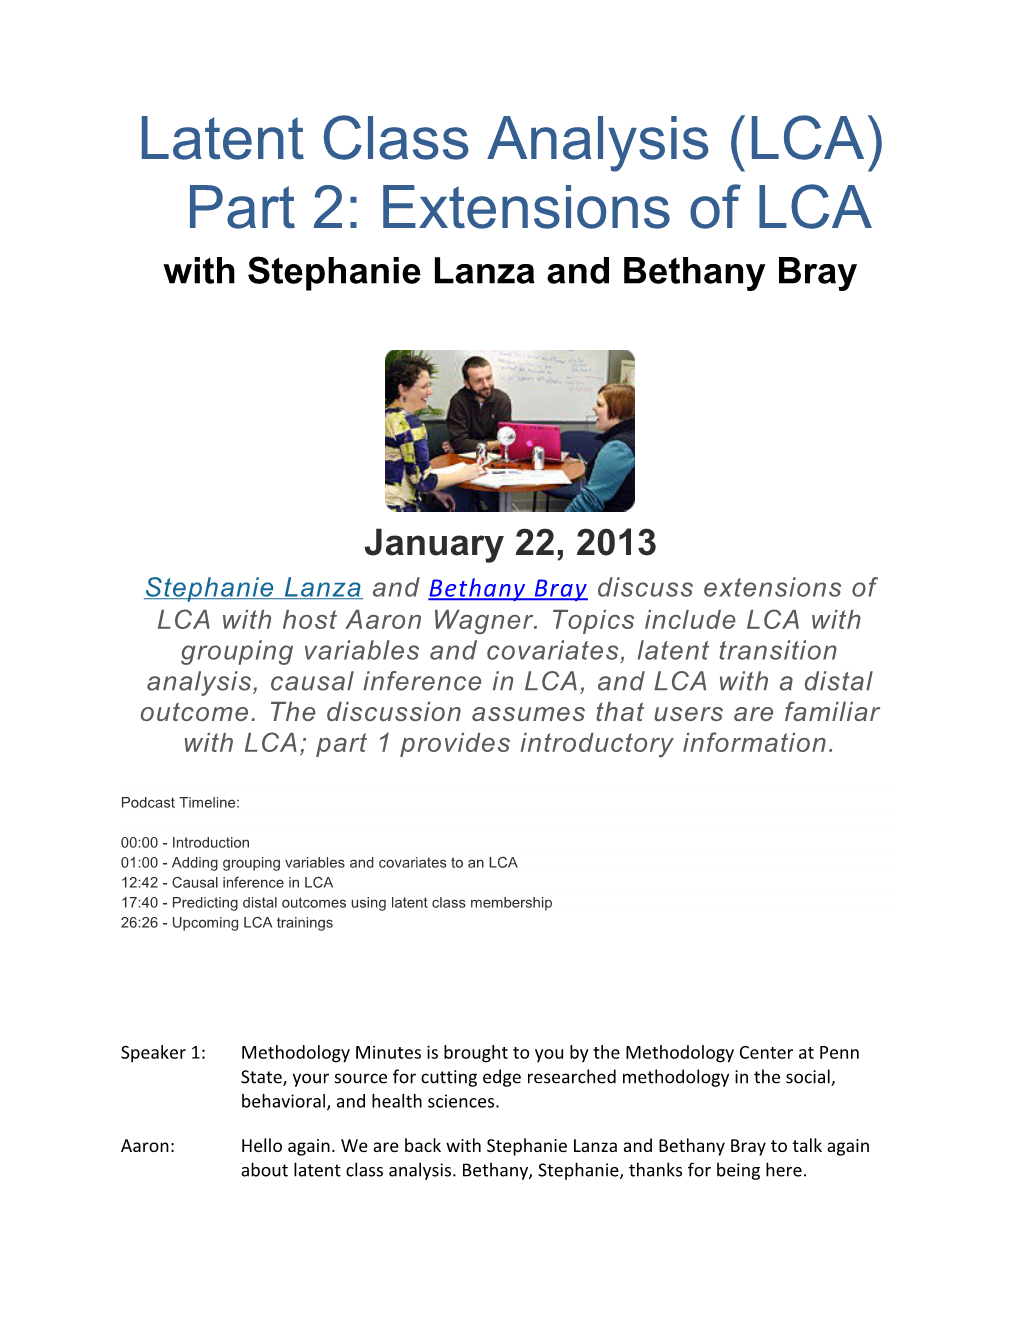 Latent Class Analysis (LCA) Part 2: Extensions of LCA